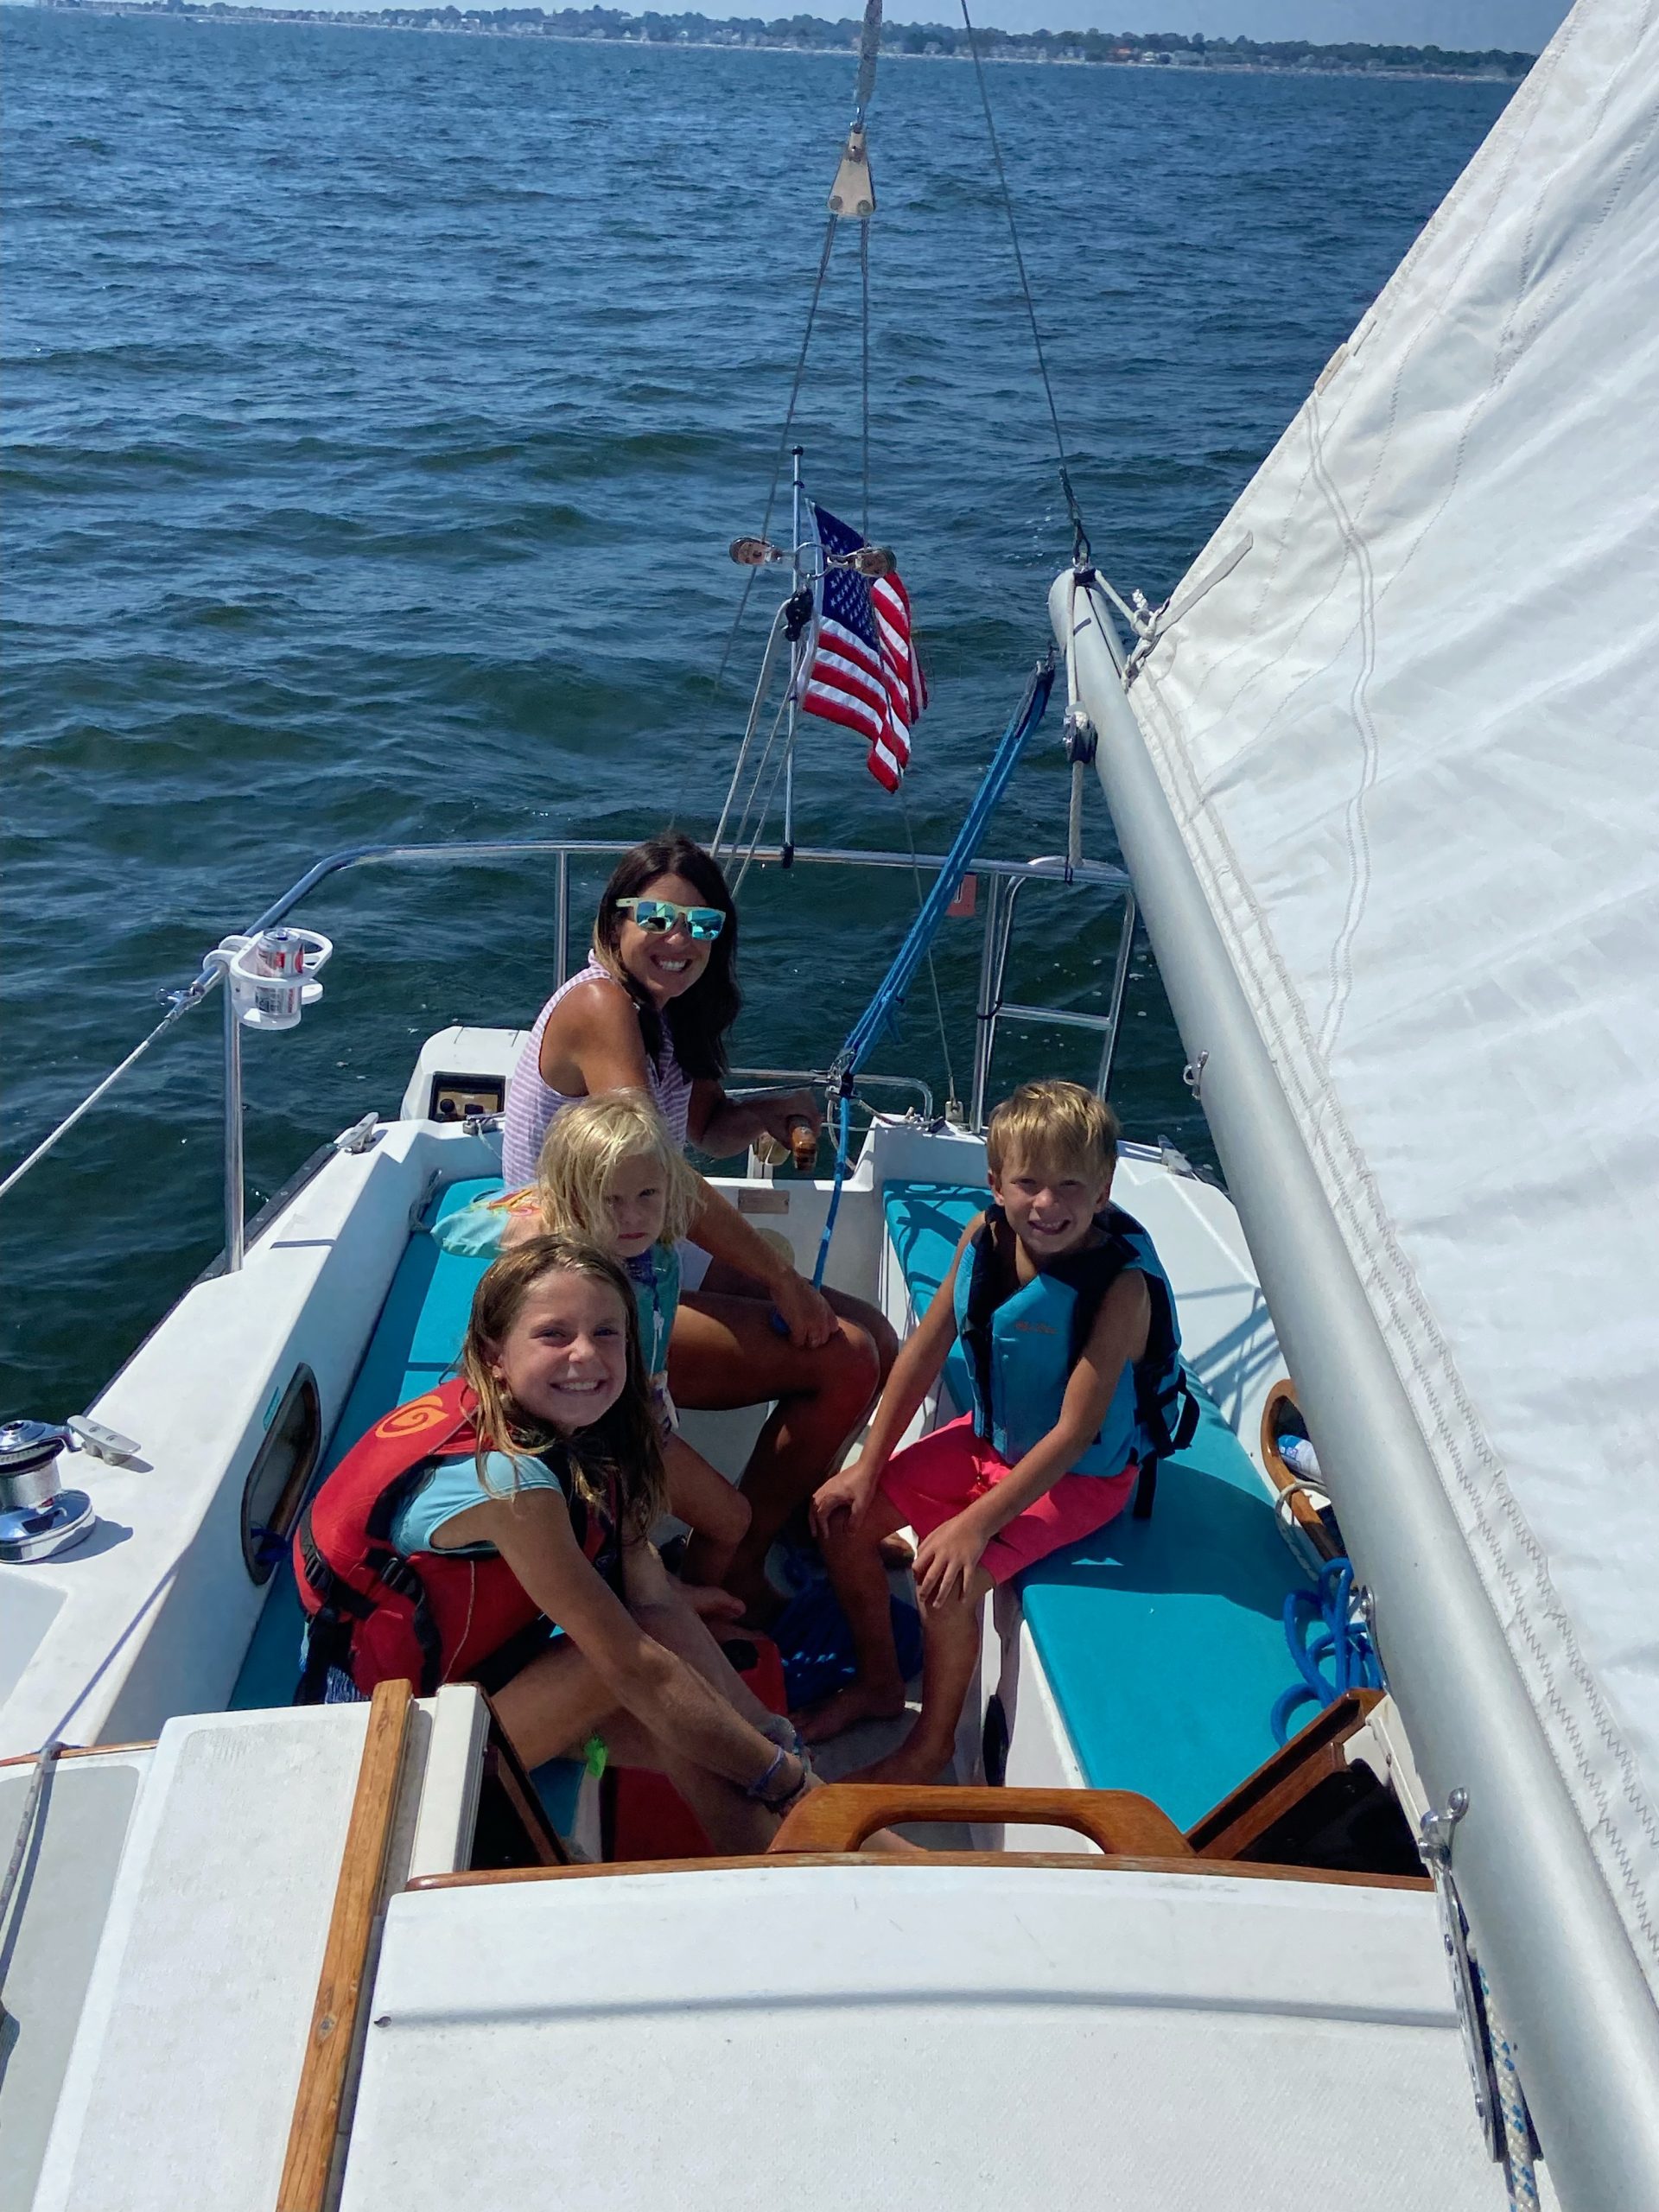 A family on a sailboat.